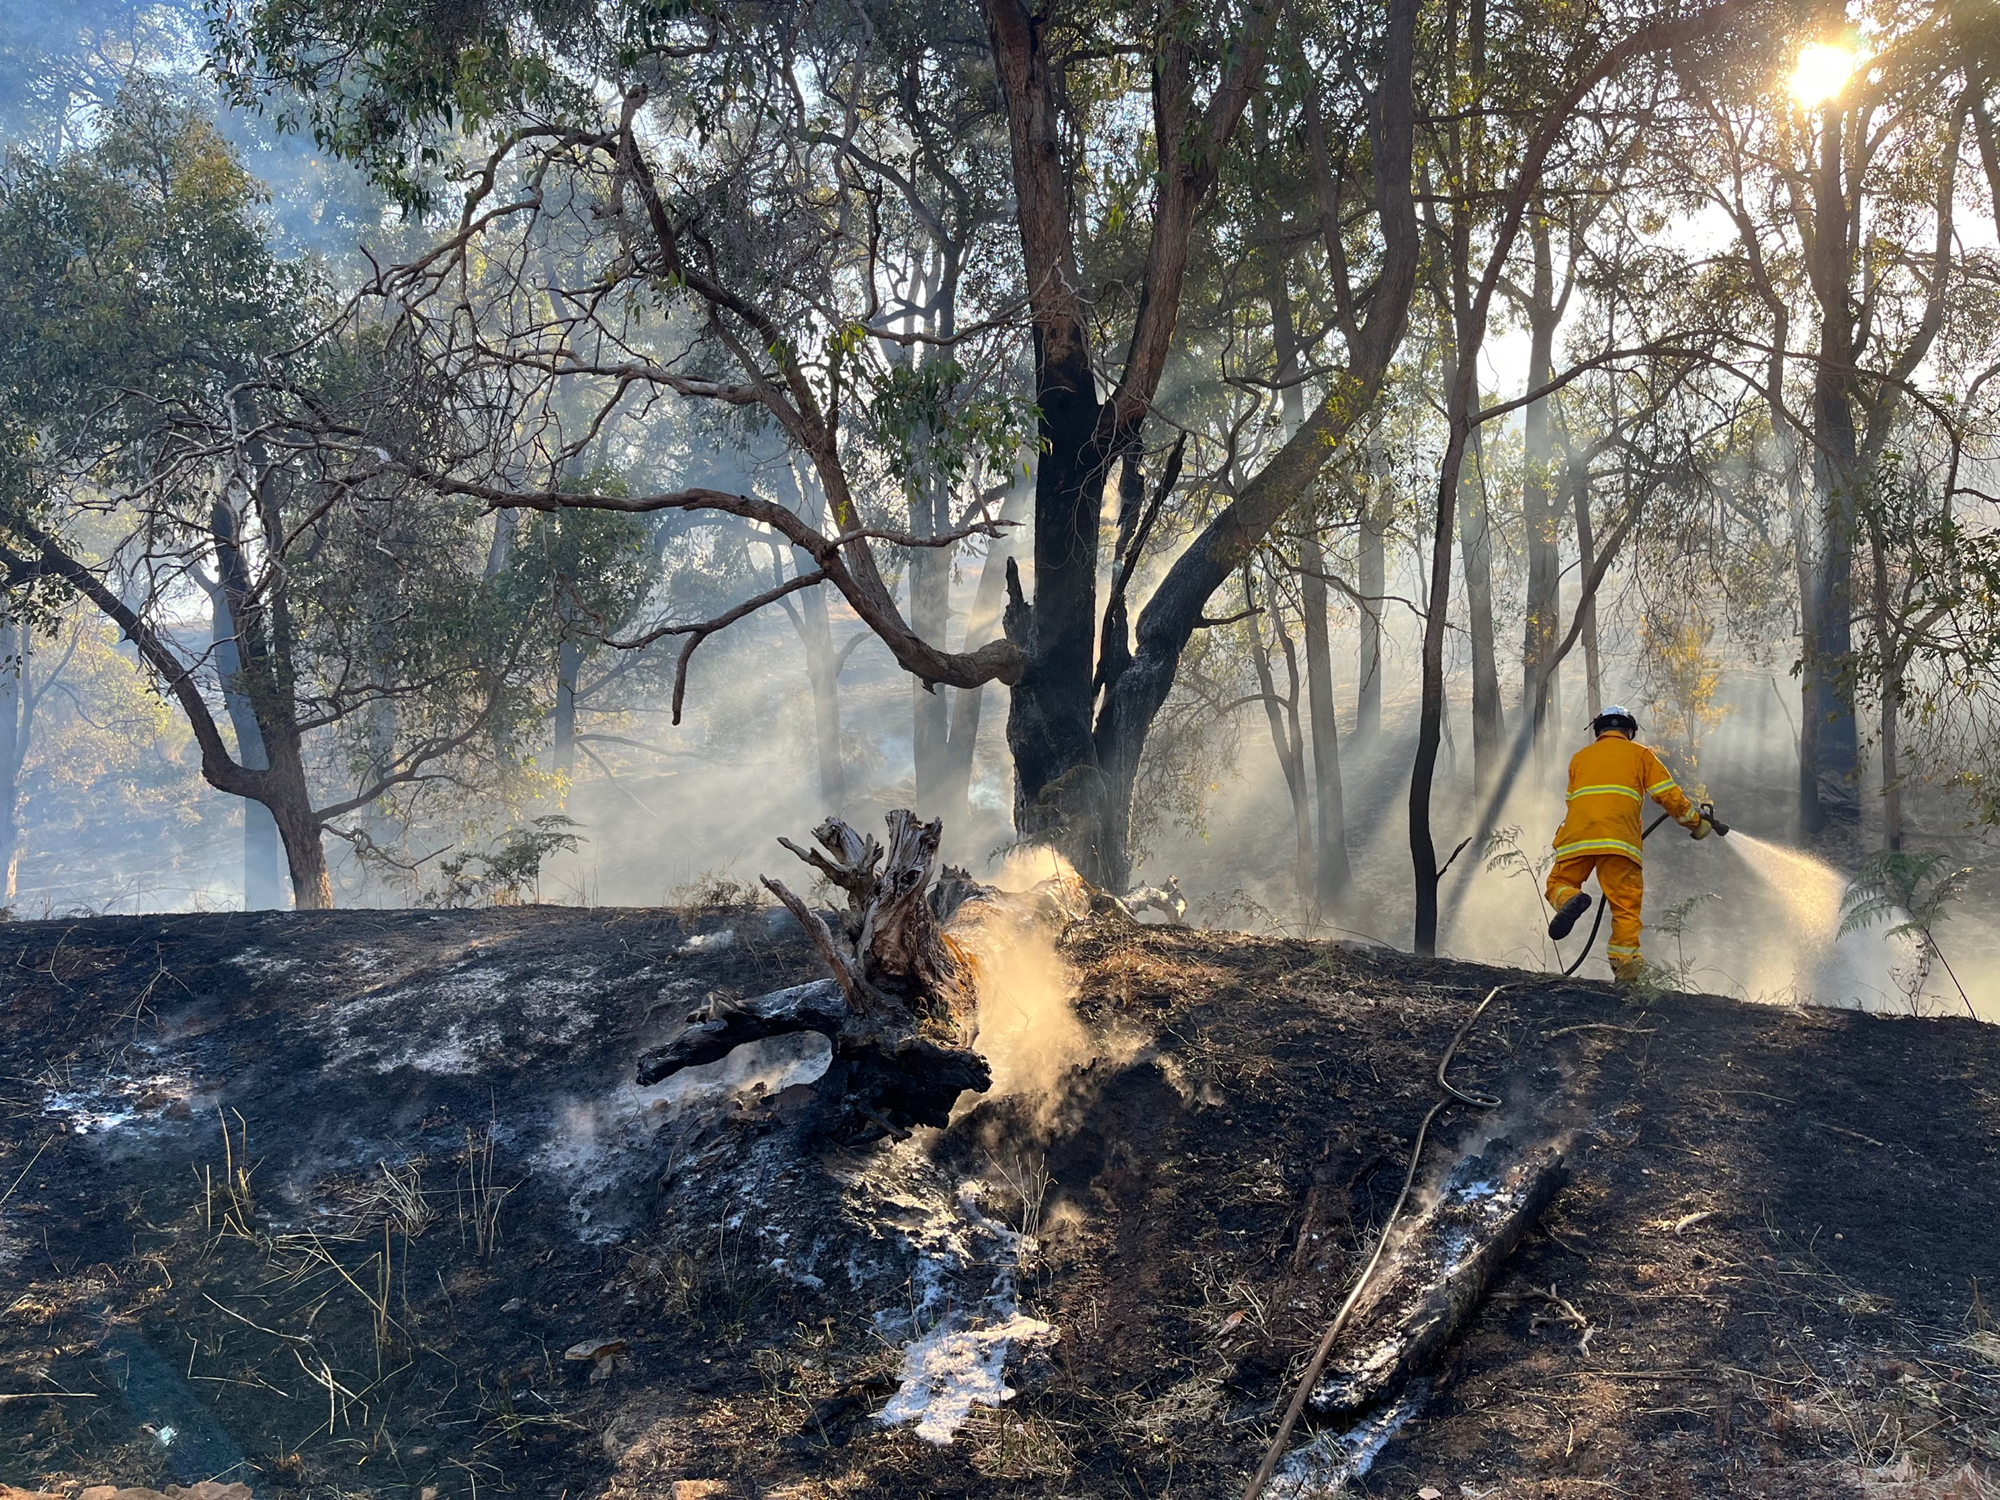 A firefighter wearing yellow protective equipment puts out a bushfire with a hose